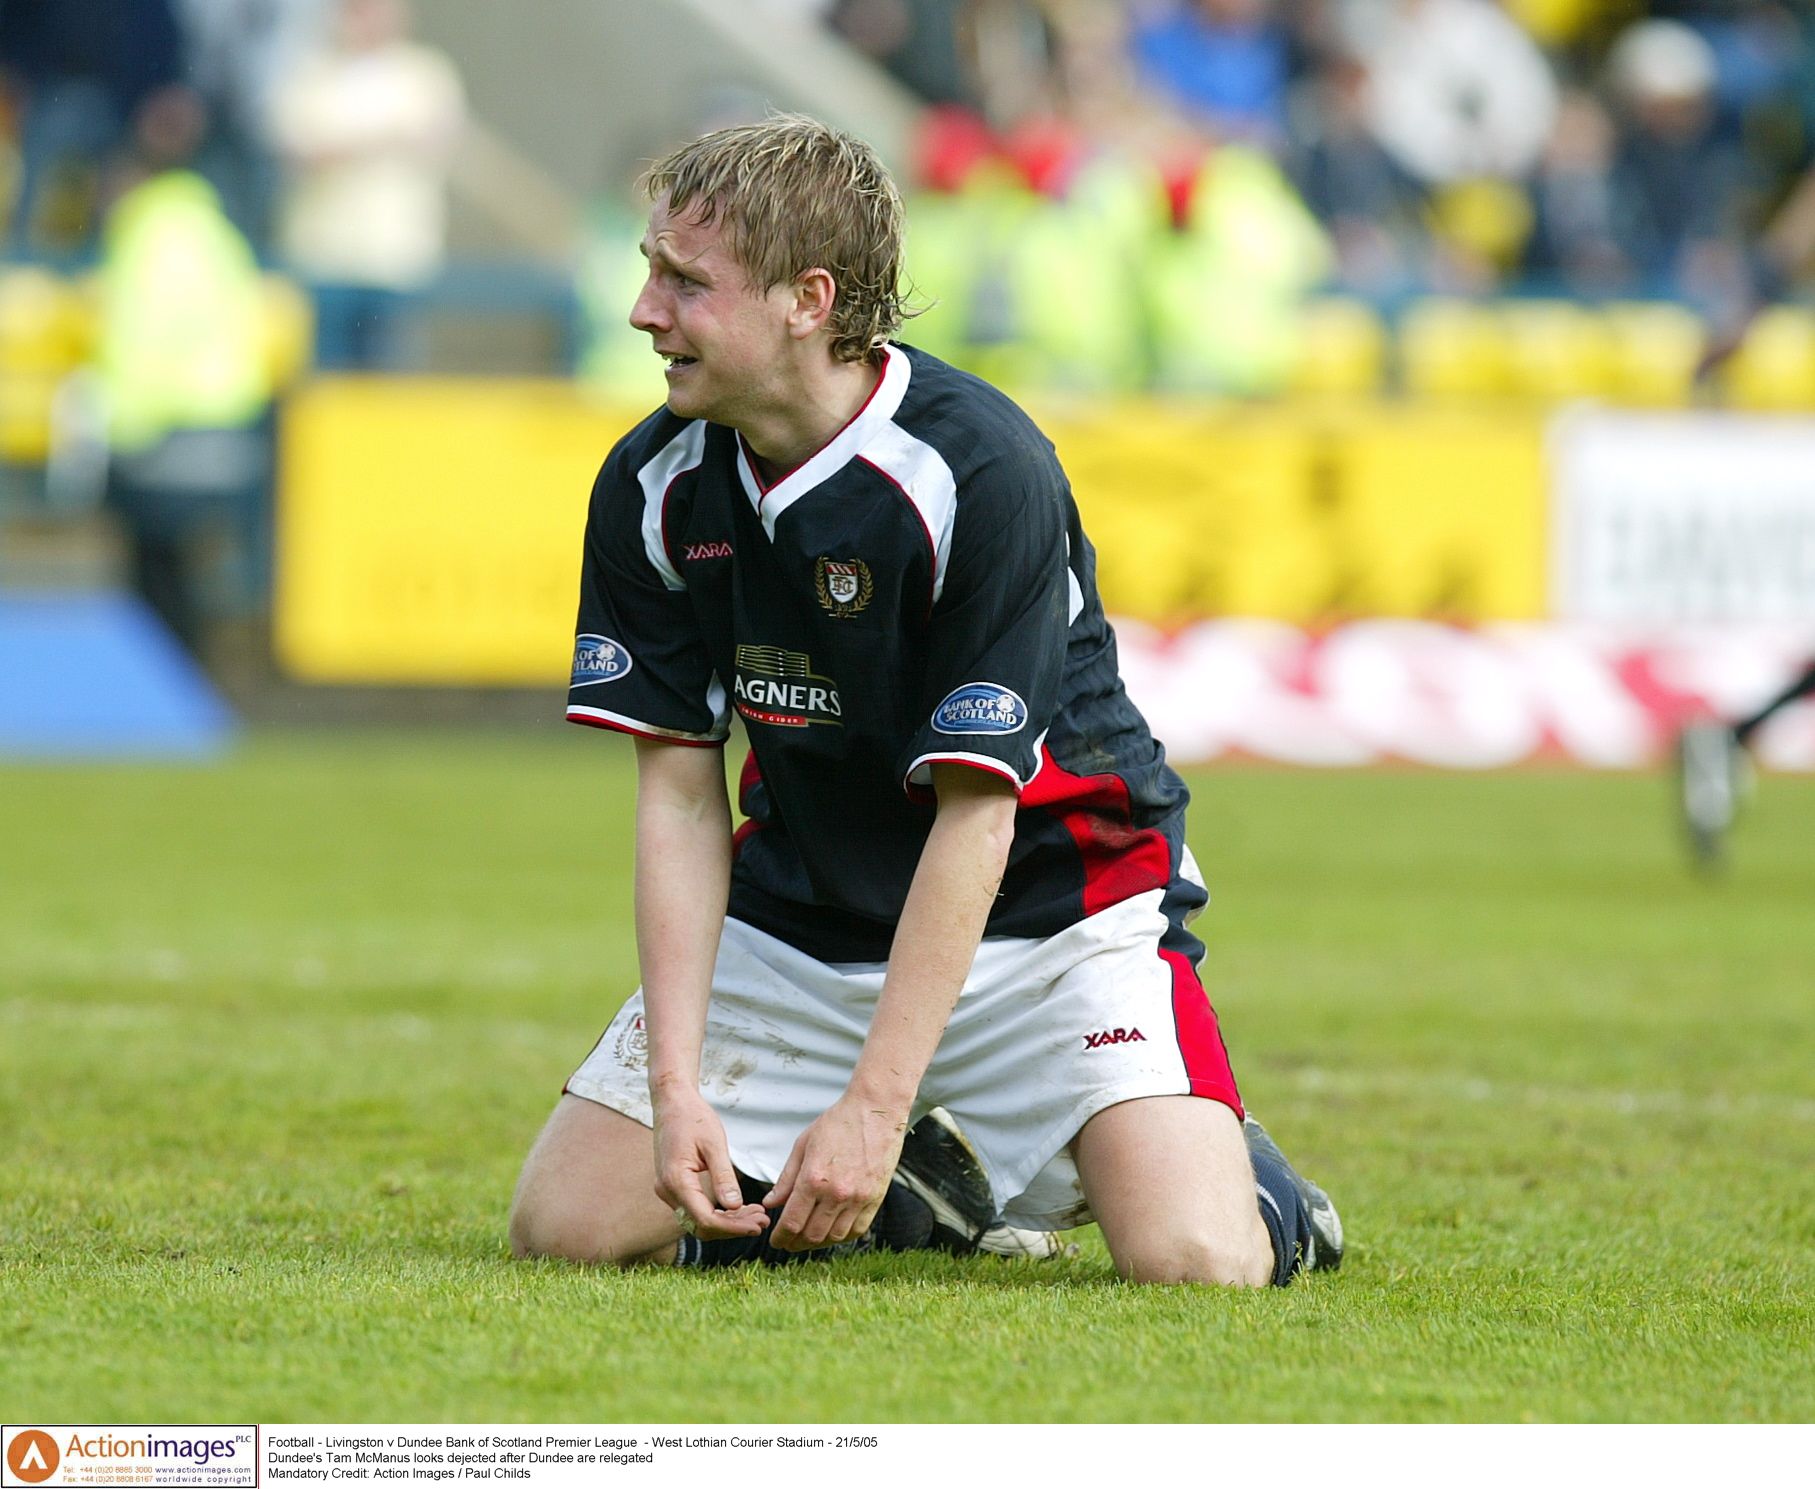 Football - Livingston v Dundee Bank of Scotland Premier League  - West Lothian Courier Stadium - 21/5/05 
Dundee's Tam McManus looks dejected after Dundee are relegated 
Mandatory Credit: Action Images / Paul Childs